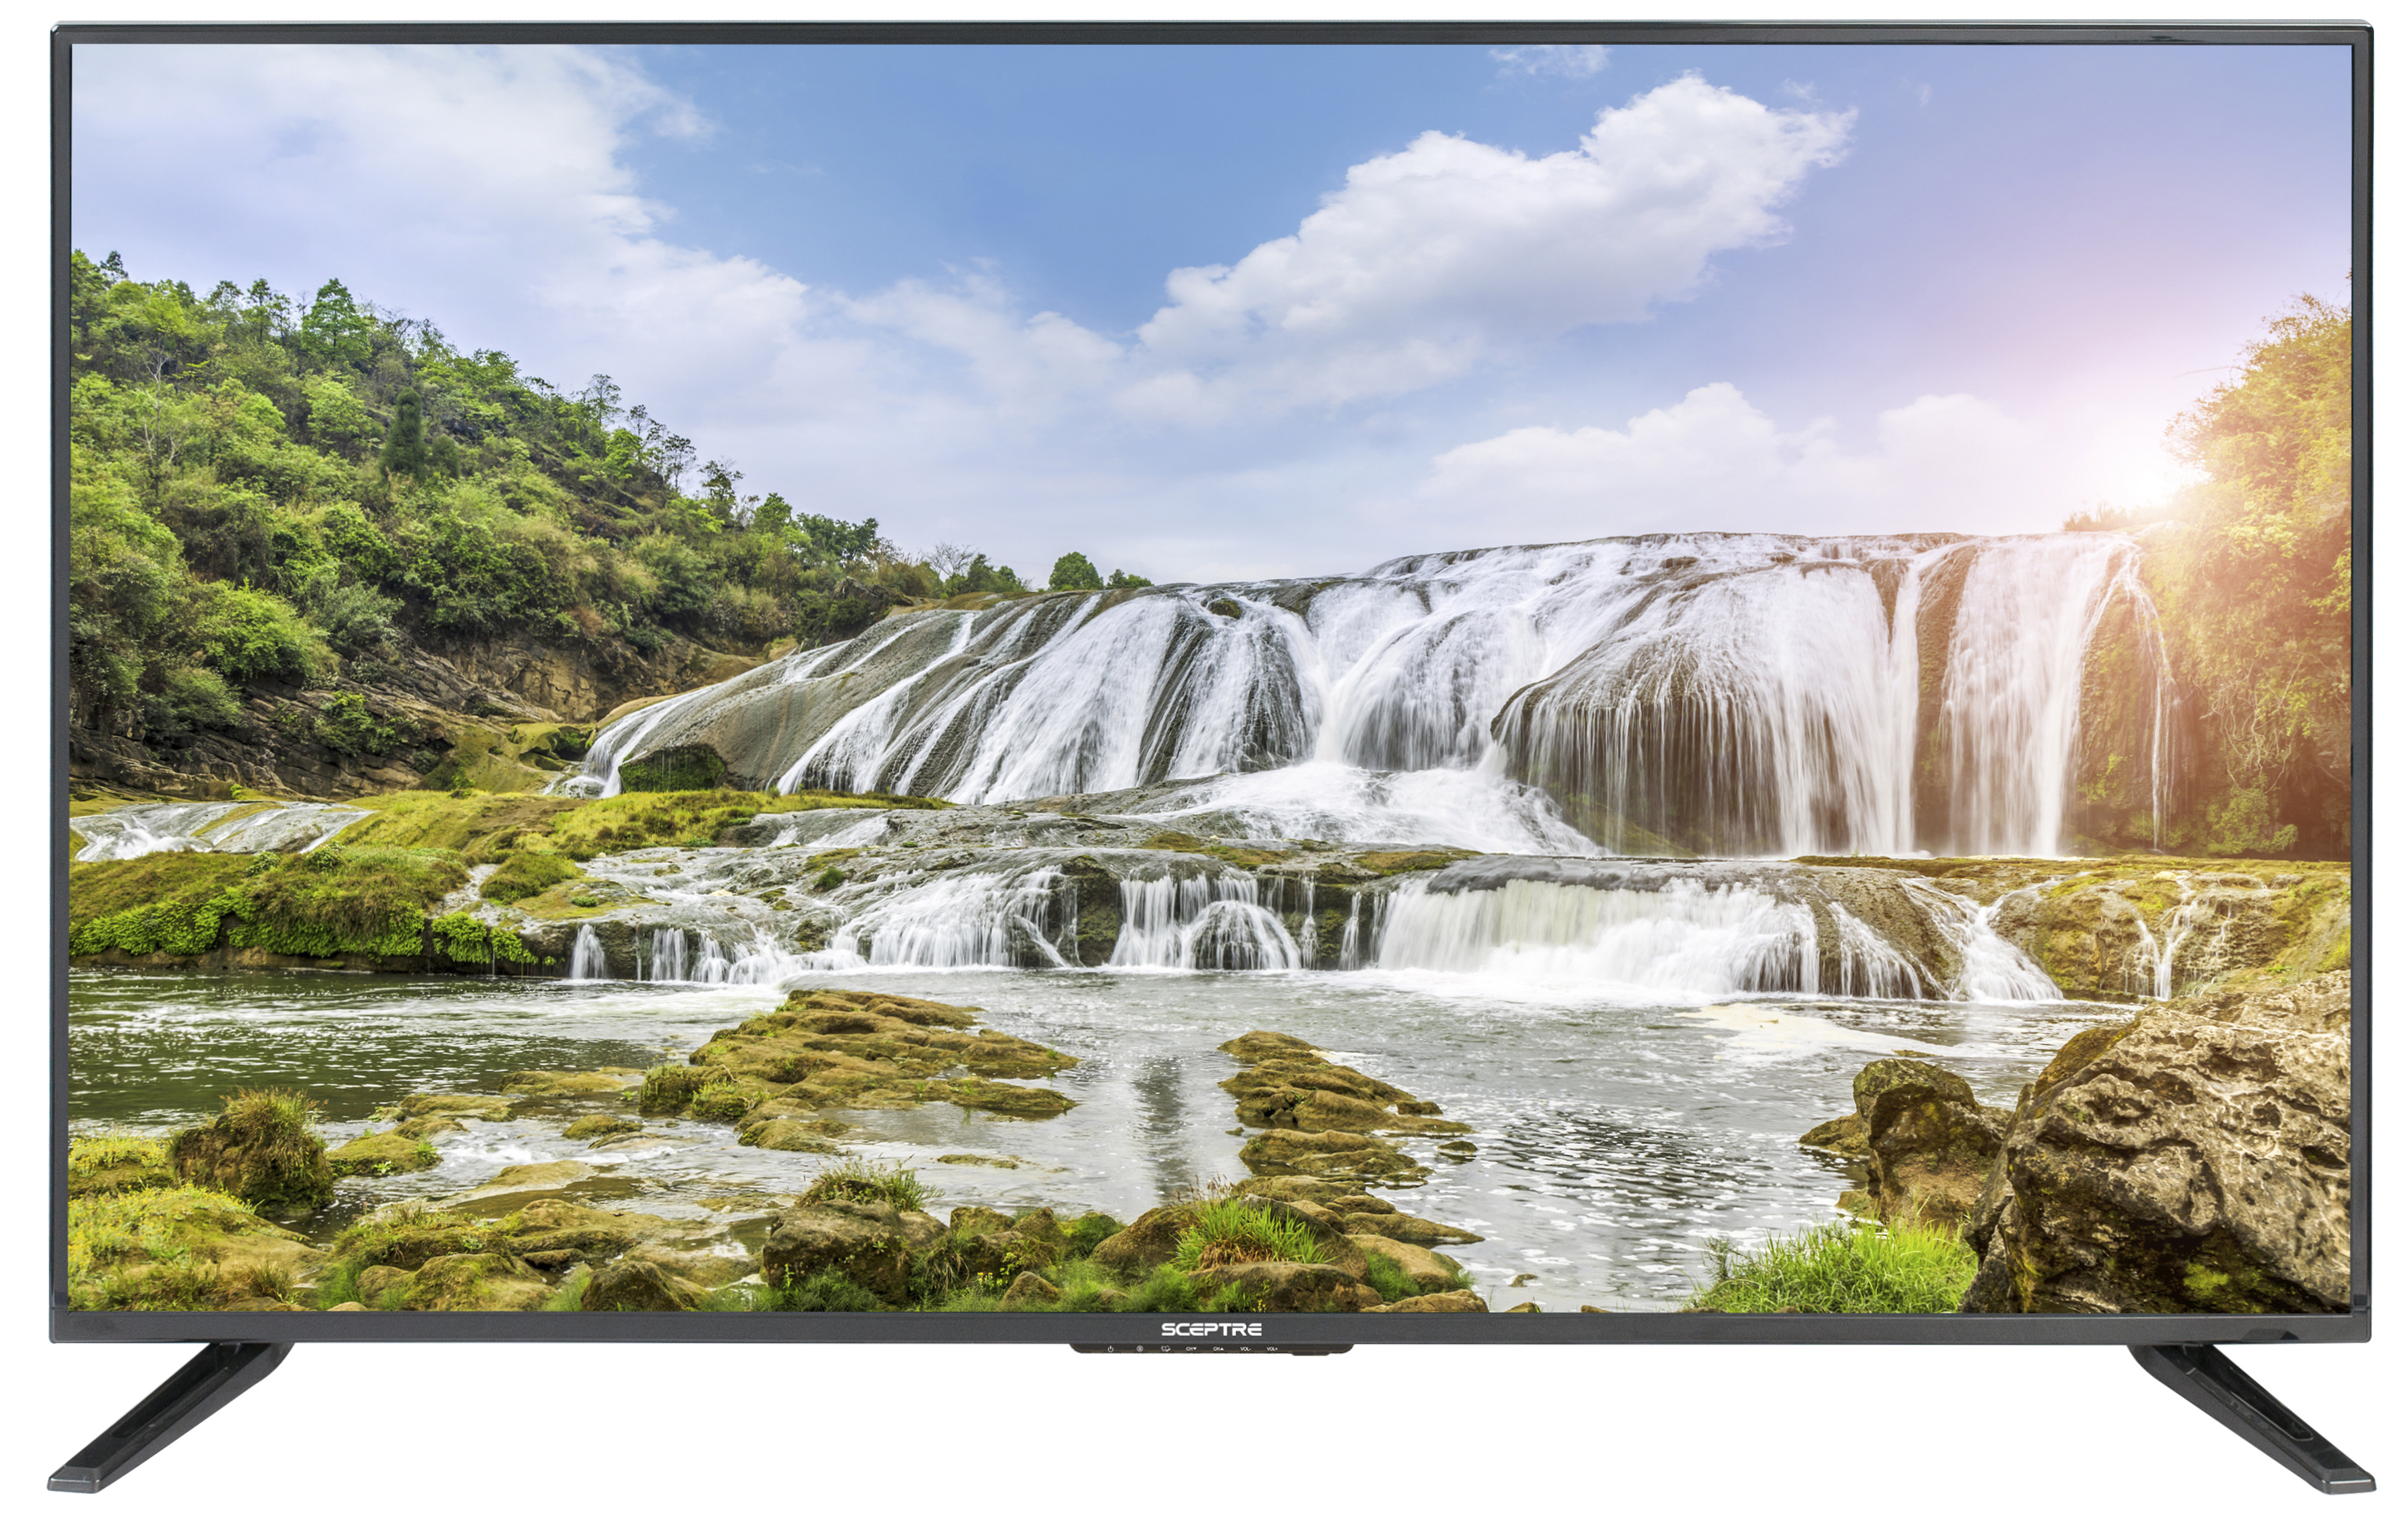 Sceptre 43-in Class FHD LED TV ONLY $189.99 (Reg $348)